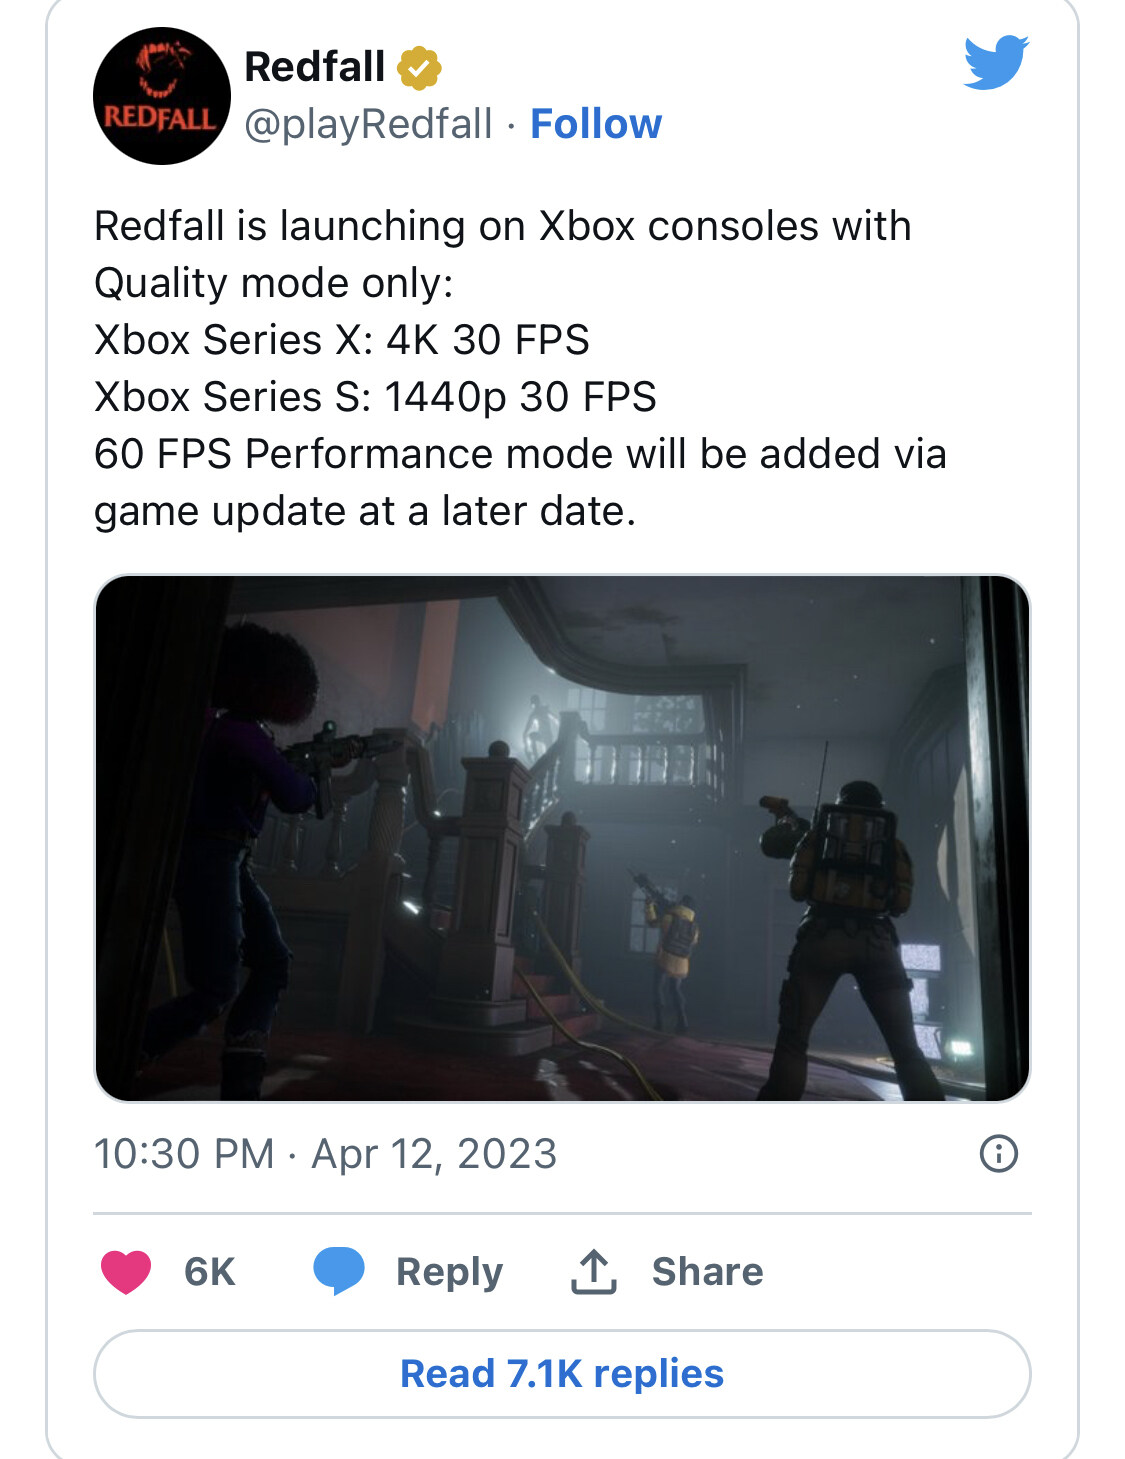 Redfall will launch with Denuvo on PC, no 60 FPS on console